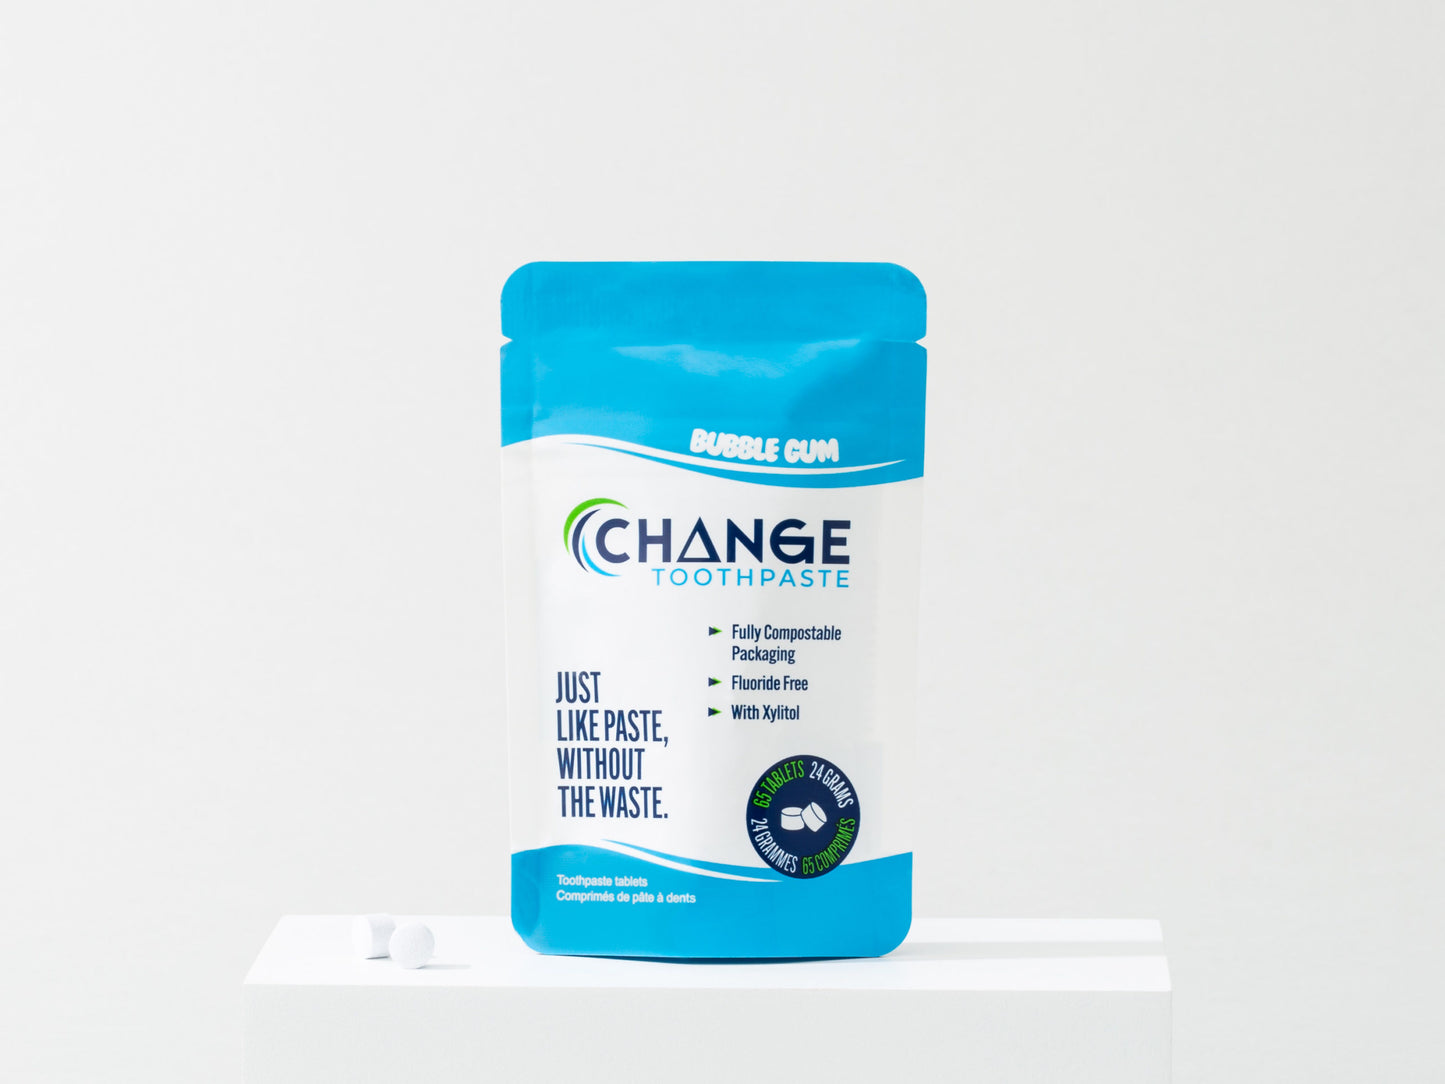 Change Toothpaste Tablets